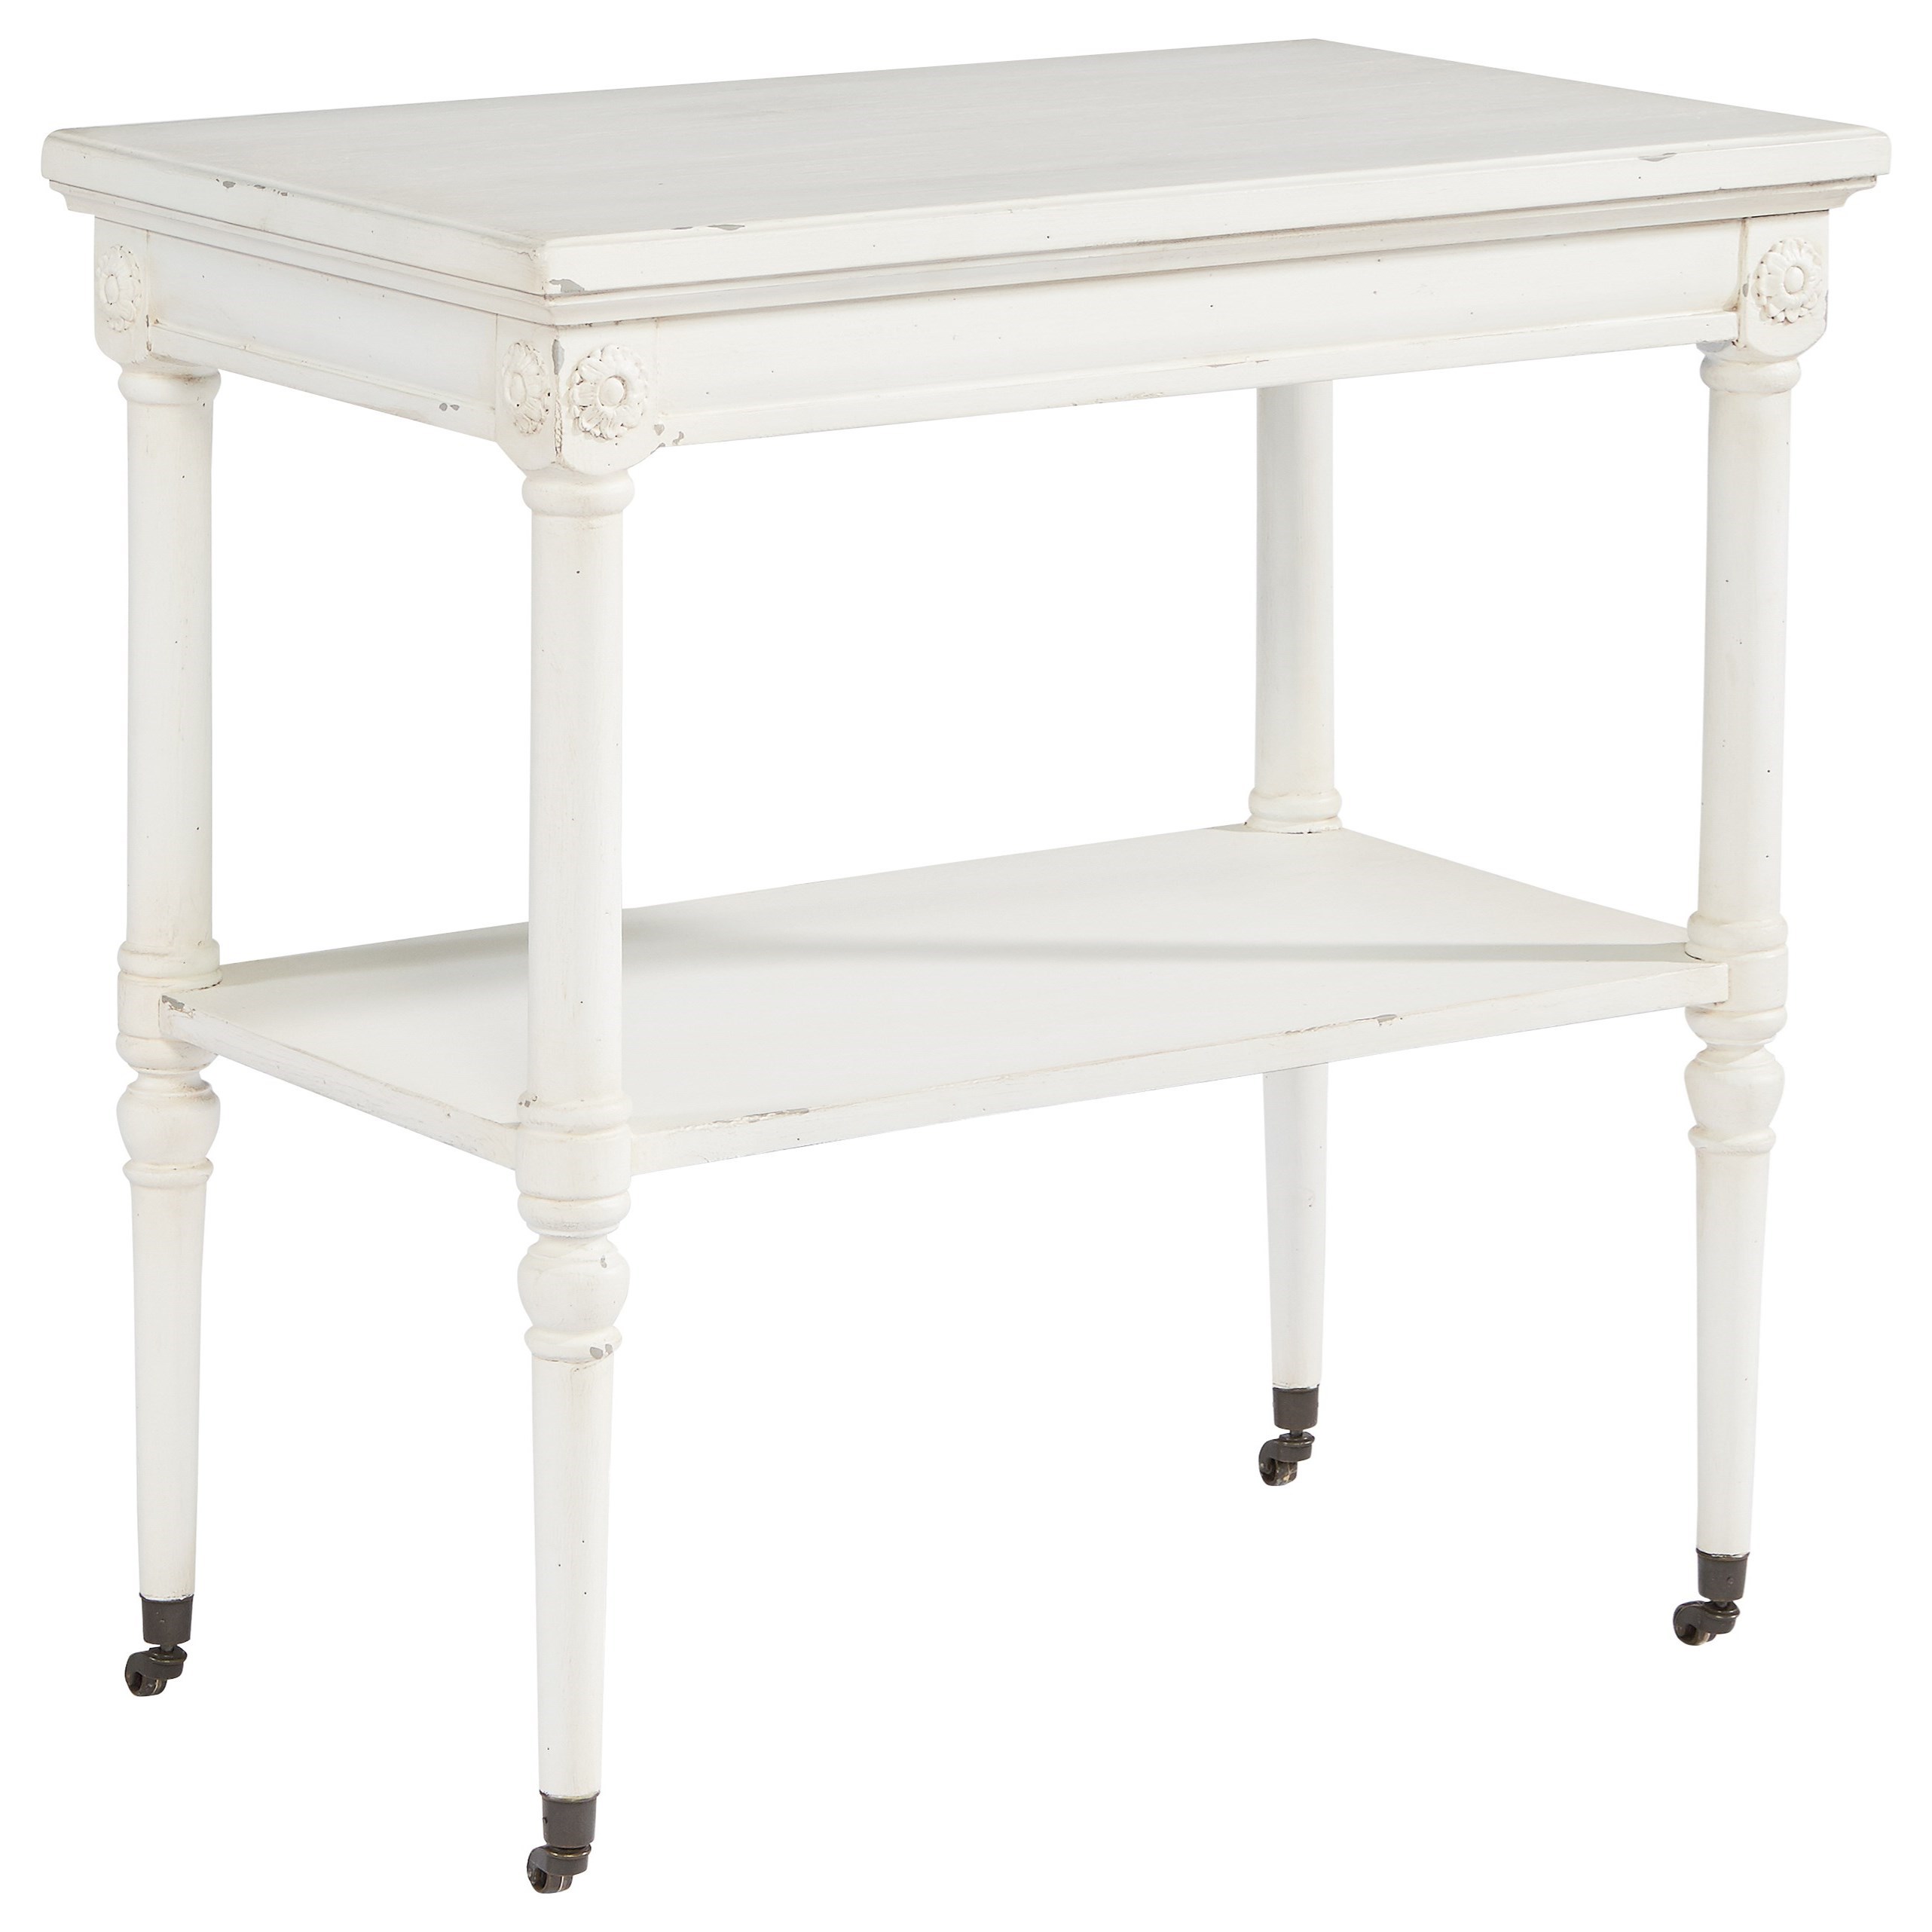 magnolia home joanna gaines french inspired petite products color accent table groups rosette with casters coconis furniture mattress end tables ethan allen reviews avalon round